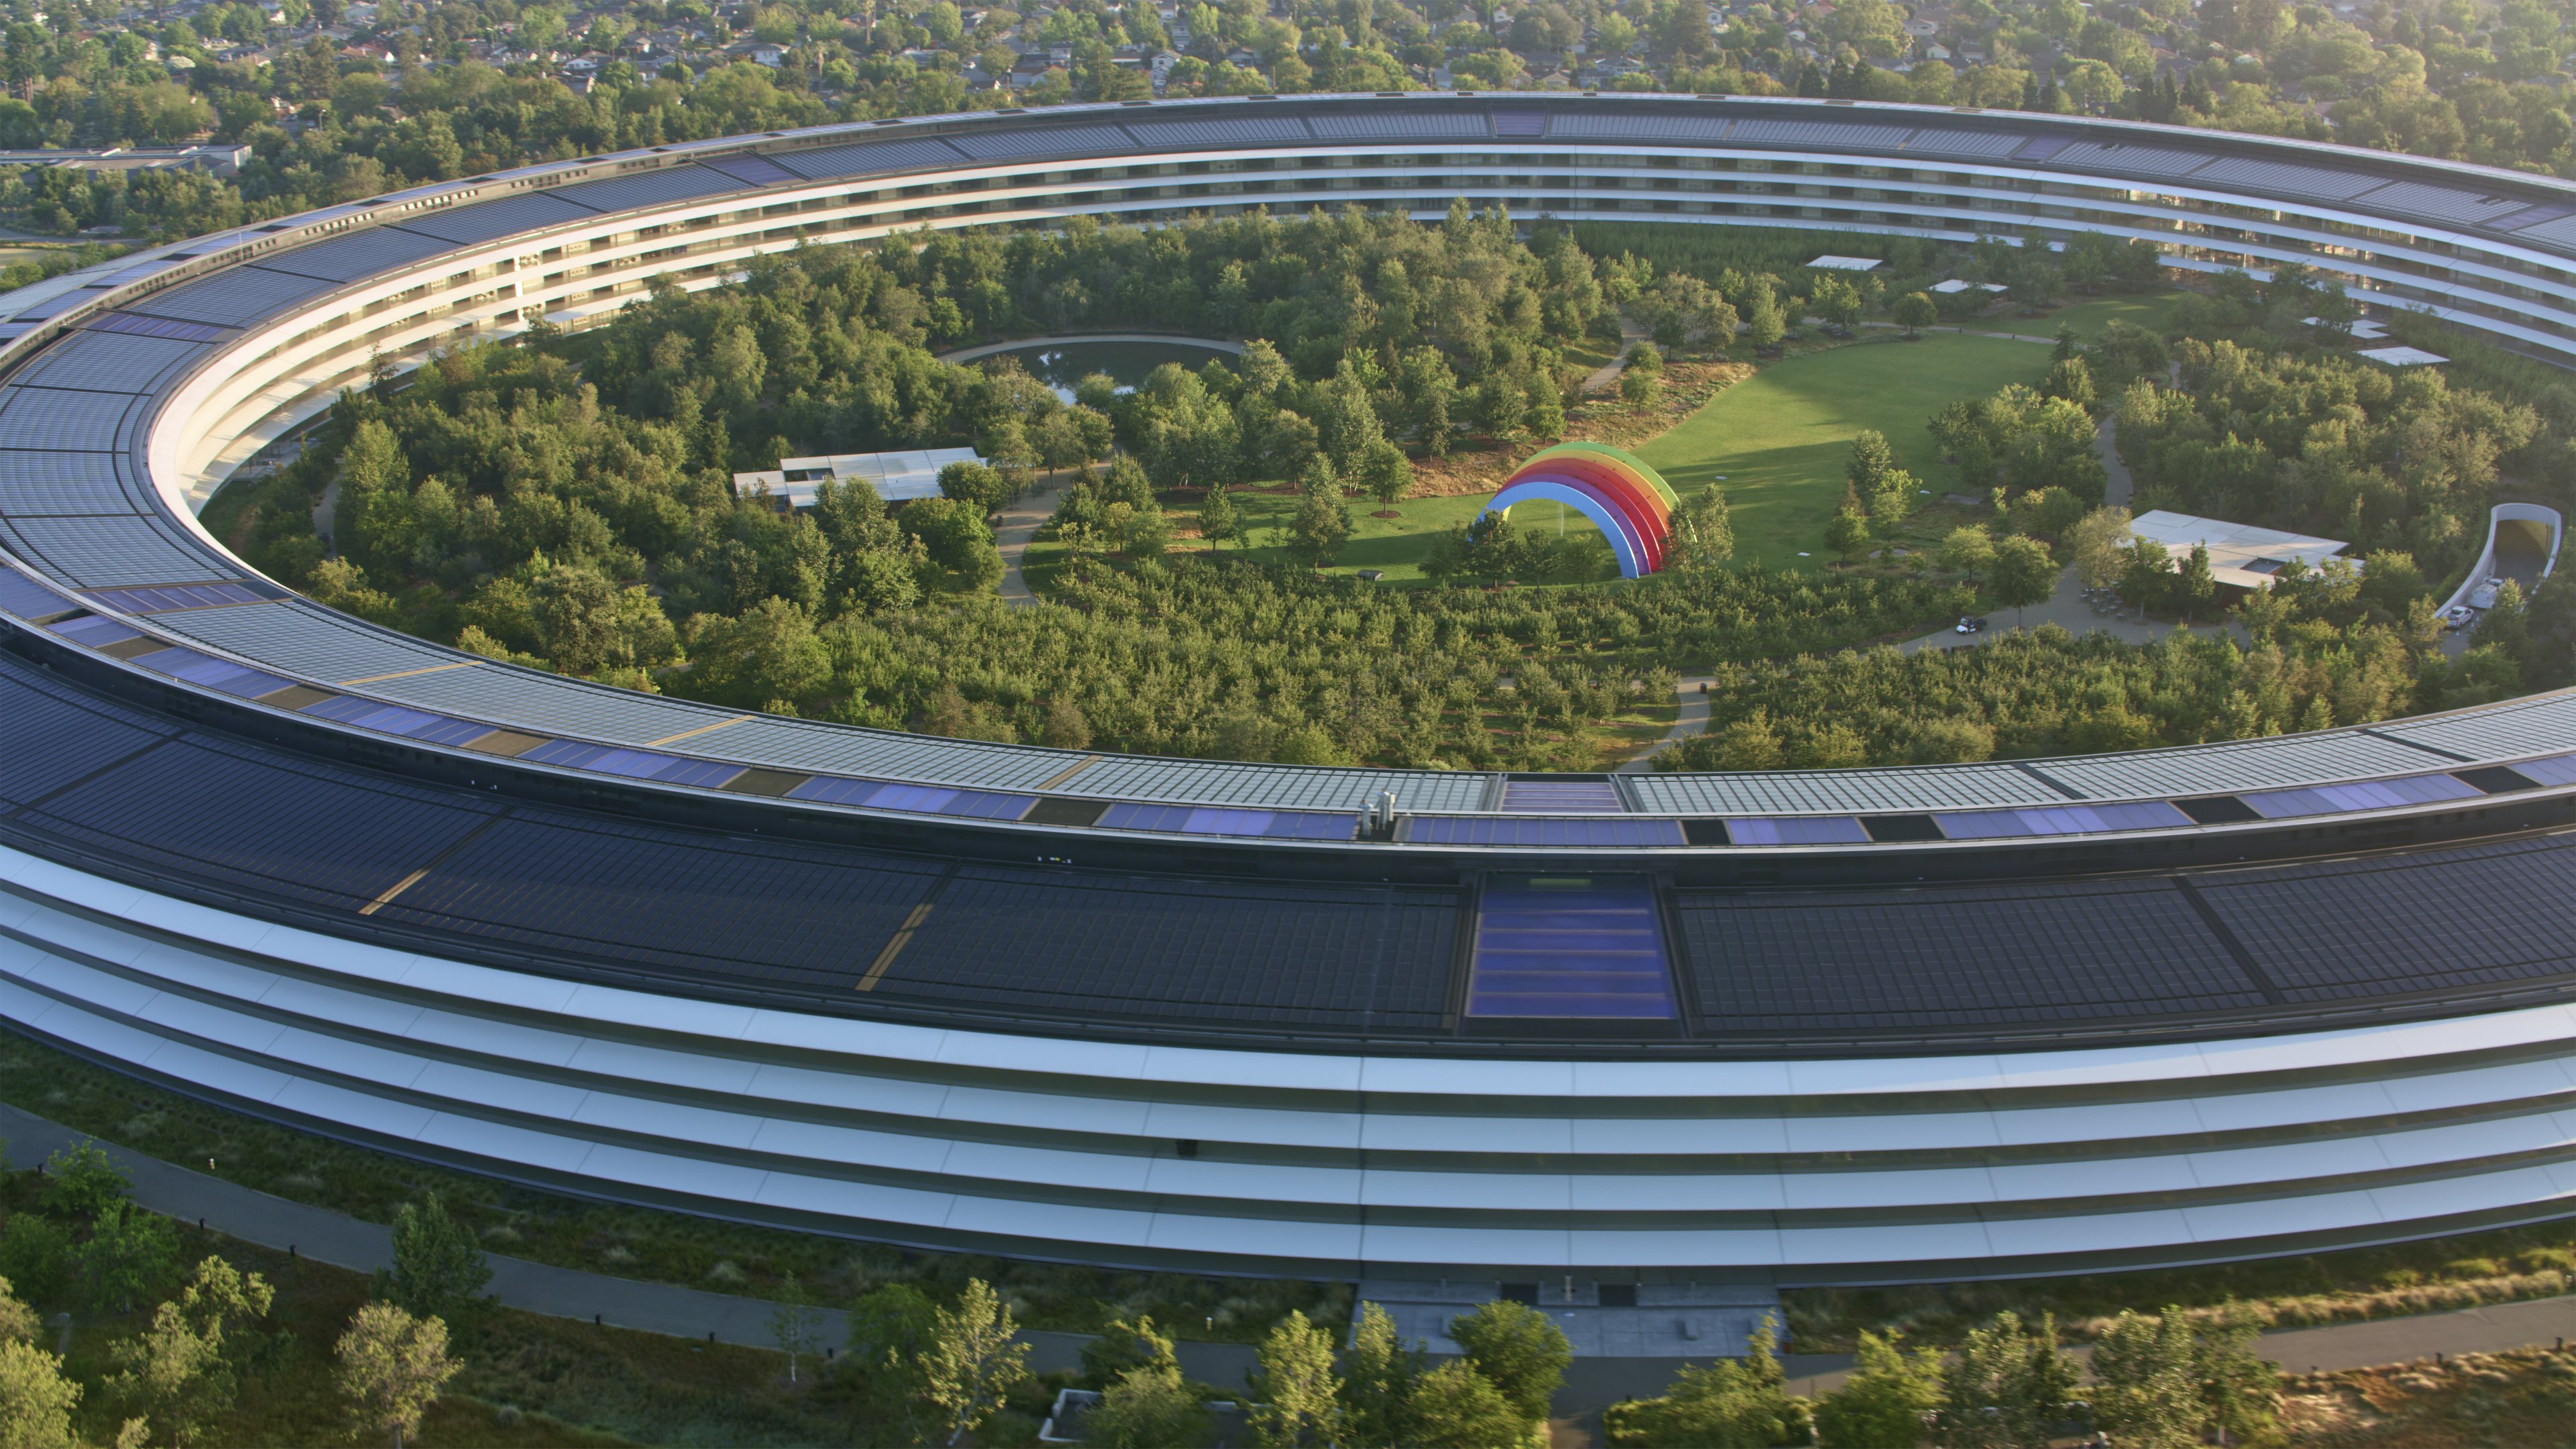 Cupertino, California / USA - December 22, 2022: Aerial view of Apple corporate headquarters building in Silicon Valley.

Apple Inc. is an American multinational technology company headquartered in Cupertino, California that designs, develops, and sells consumer electronics, computer software, and online services.